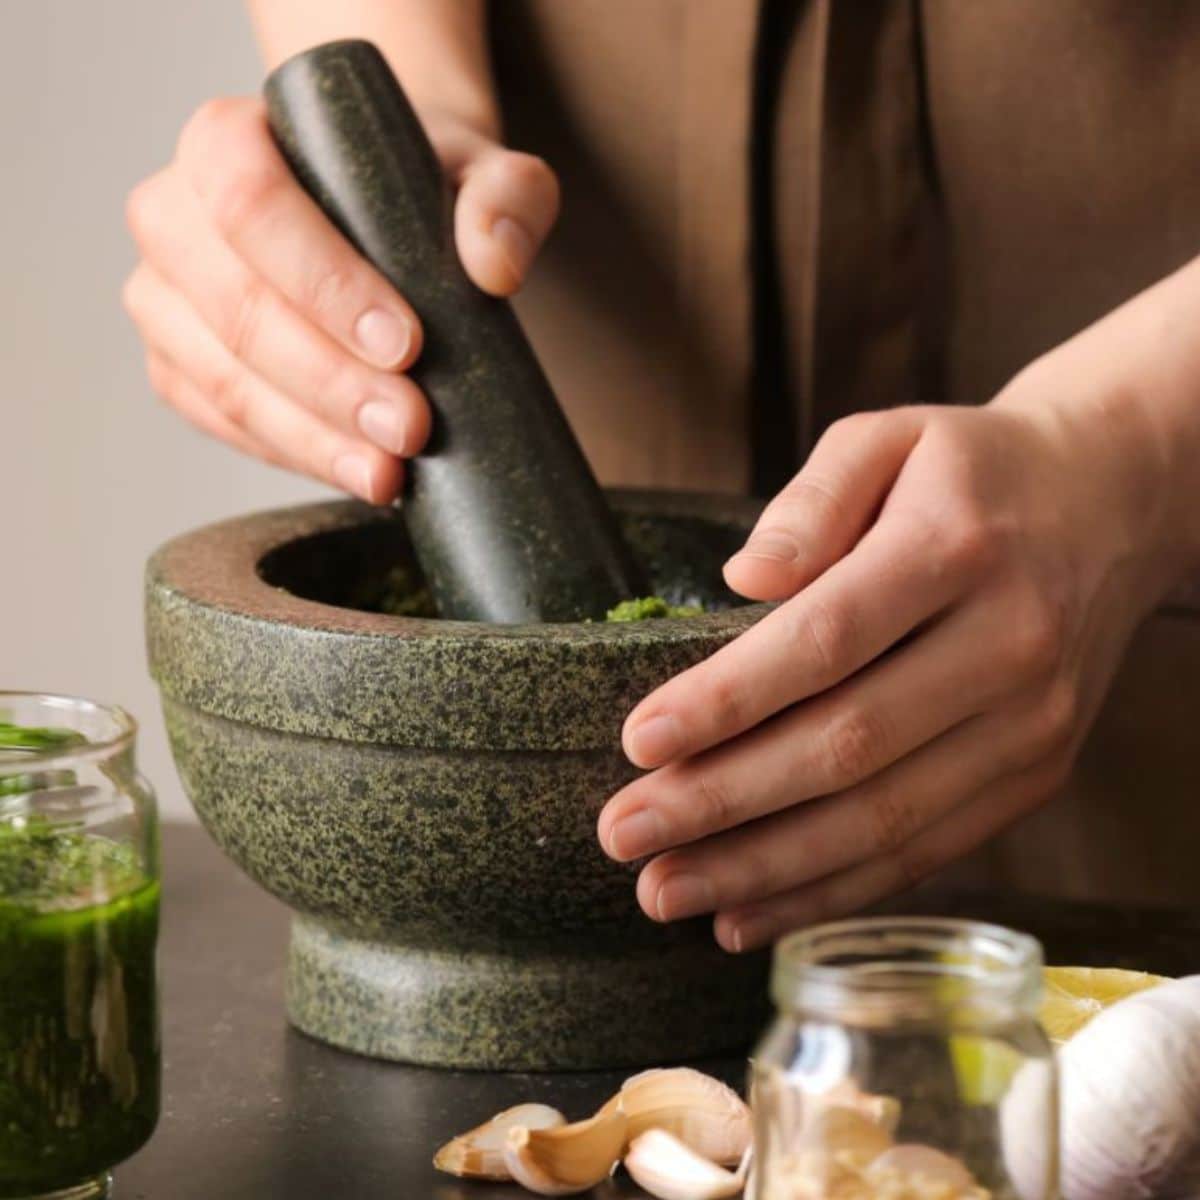 Woman making pesto sauce with mortar and pestle on a table in the kitchen